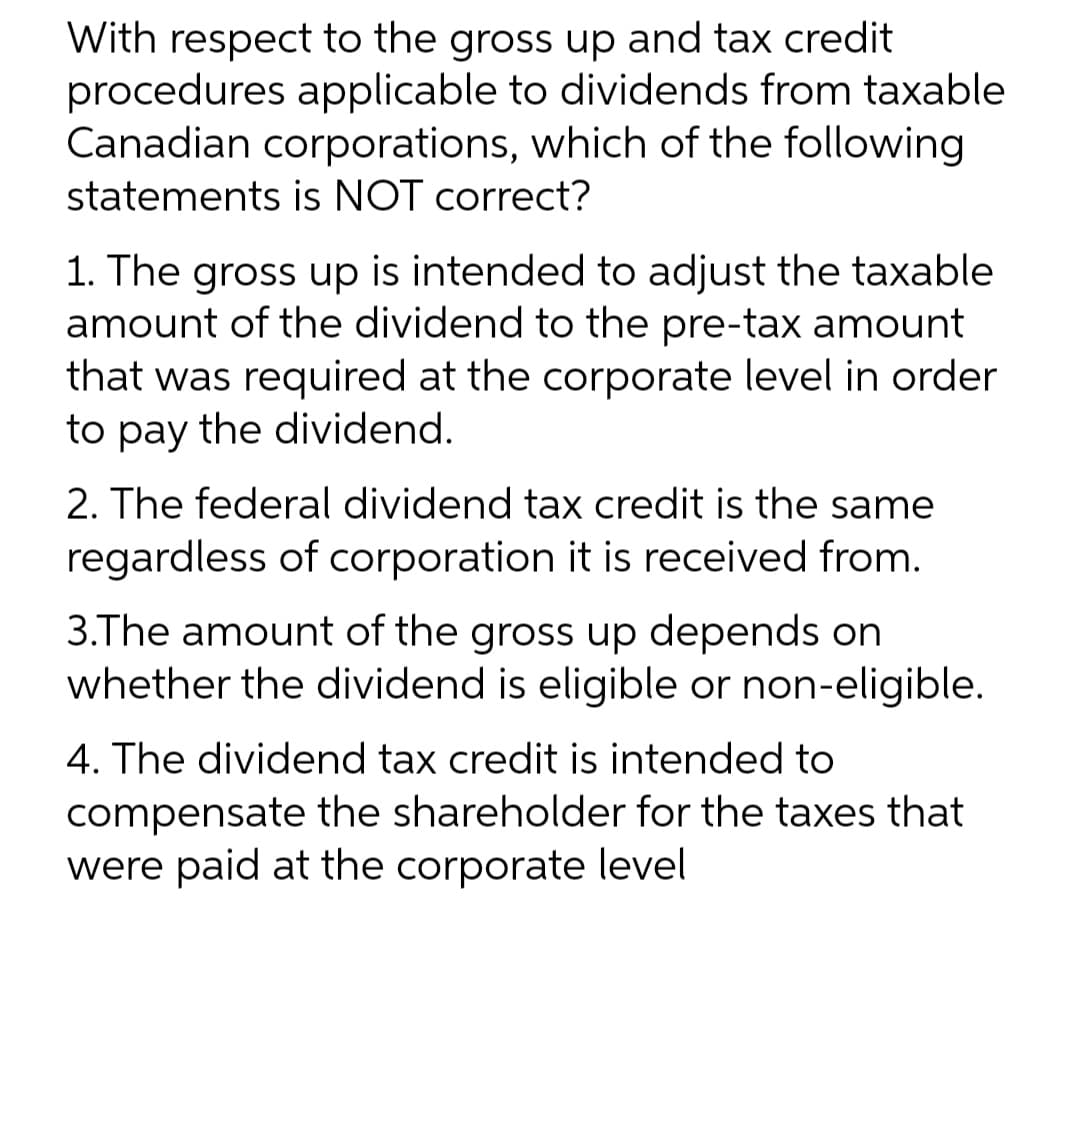 With respect to the gross up and tax credit
procedures applicable to dividends from taxable
Canadian corporations, which of the following
statements is NOT correct?
1. The gross up is intended to adjust the taxable
amount of the dividend to the pre-tax amount
that was required at the corporate level in order
to pay the dividend.
2. The federal dividend tax credit is the same
regardless of corporation it is received from.
3.The amount of the gross up depends on
whether the dividend is eligible or non-eligible.
4. The dividend tax credit is intended to
compensate the shareholder for the taxes that
were paid at the corporate level